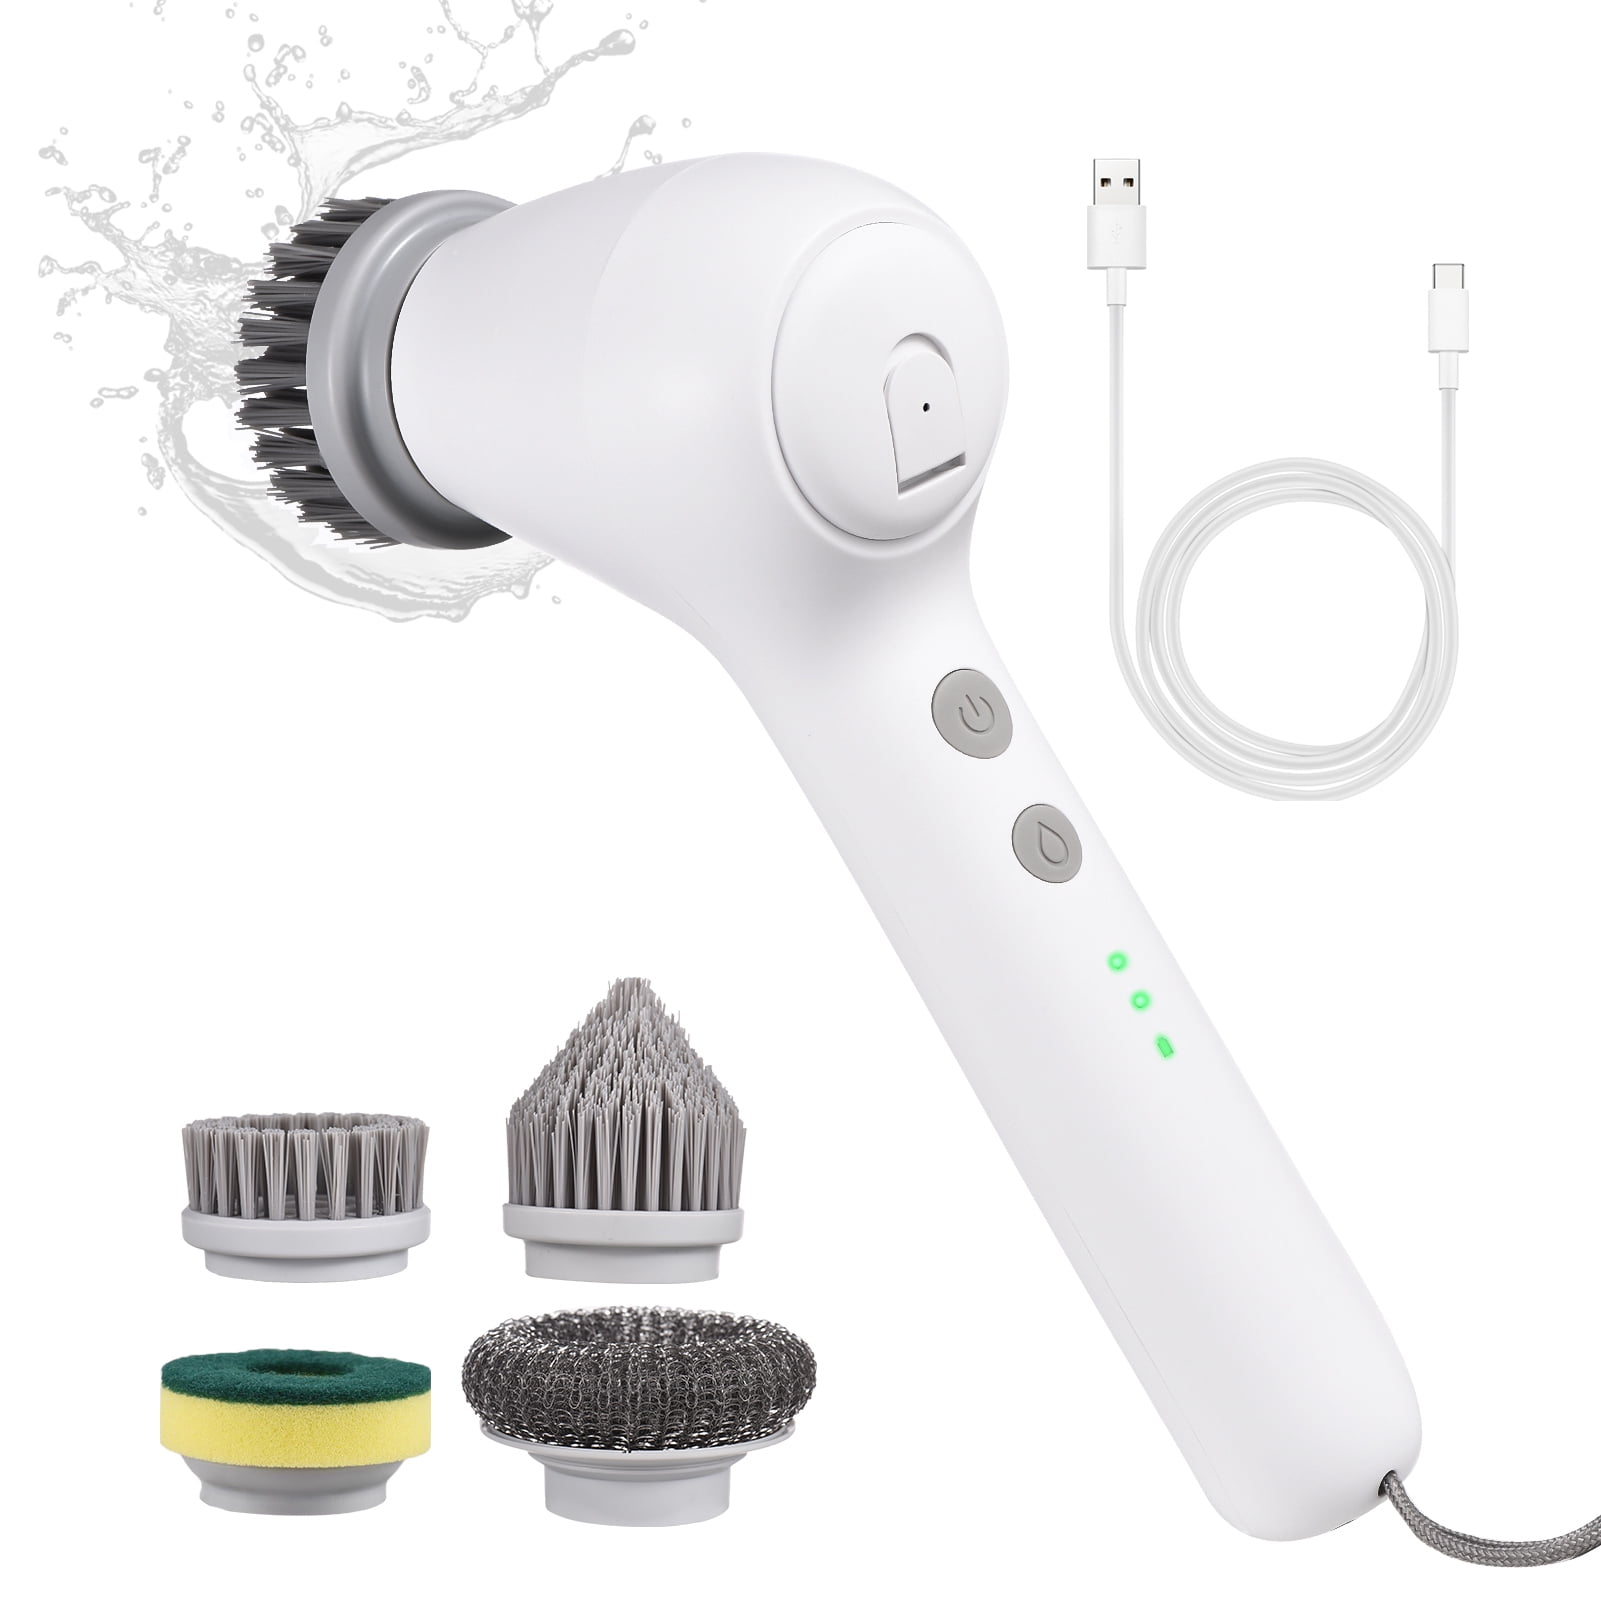 ScrubberPlus™ 5-In-1 Handheld Electric Cleaning & Scrubber Brush